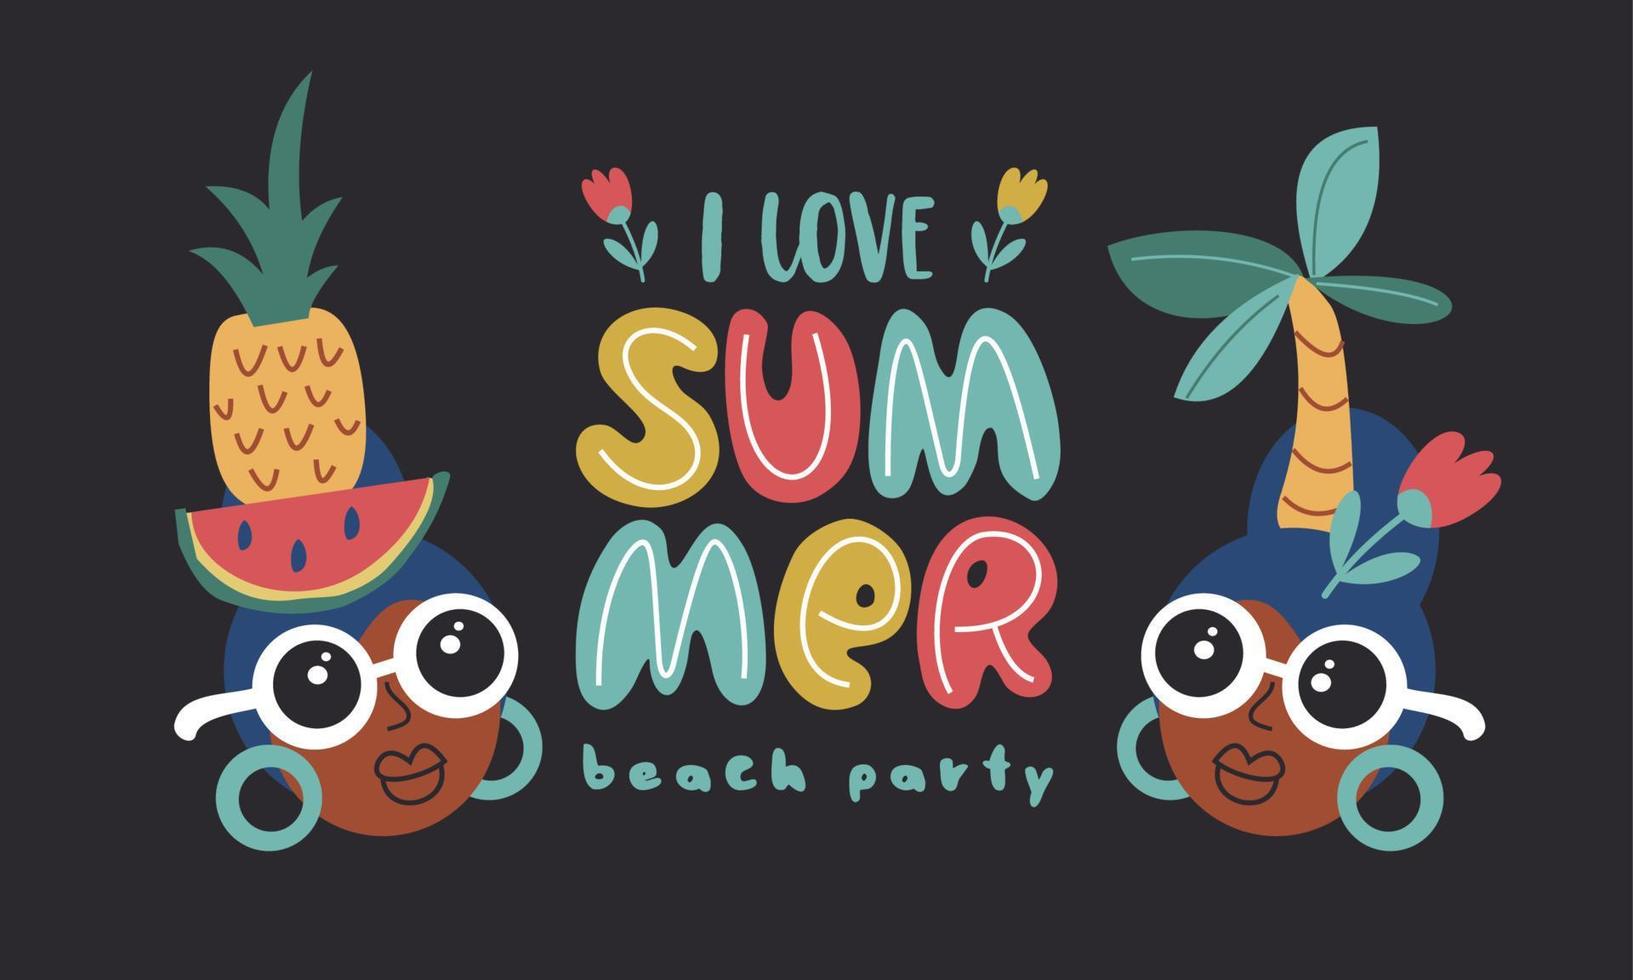 I love summer. Vector templates with fun summer illustration. Design element for summer concept and other use.